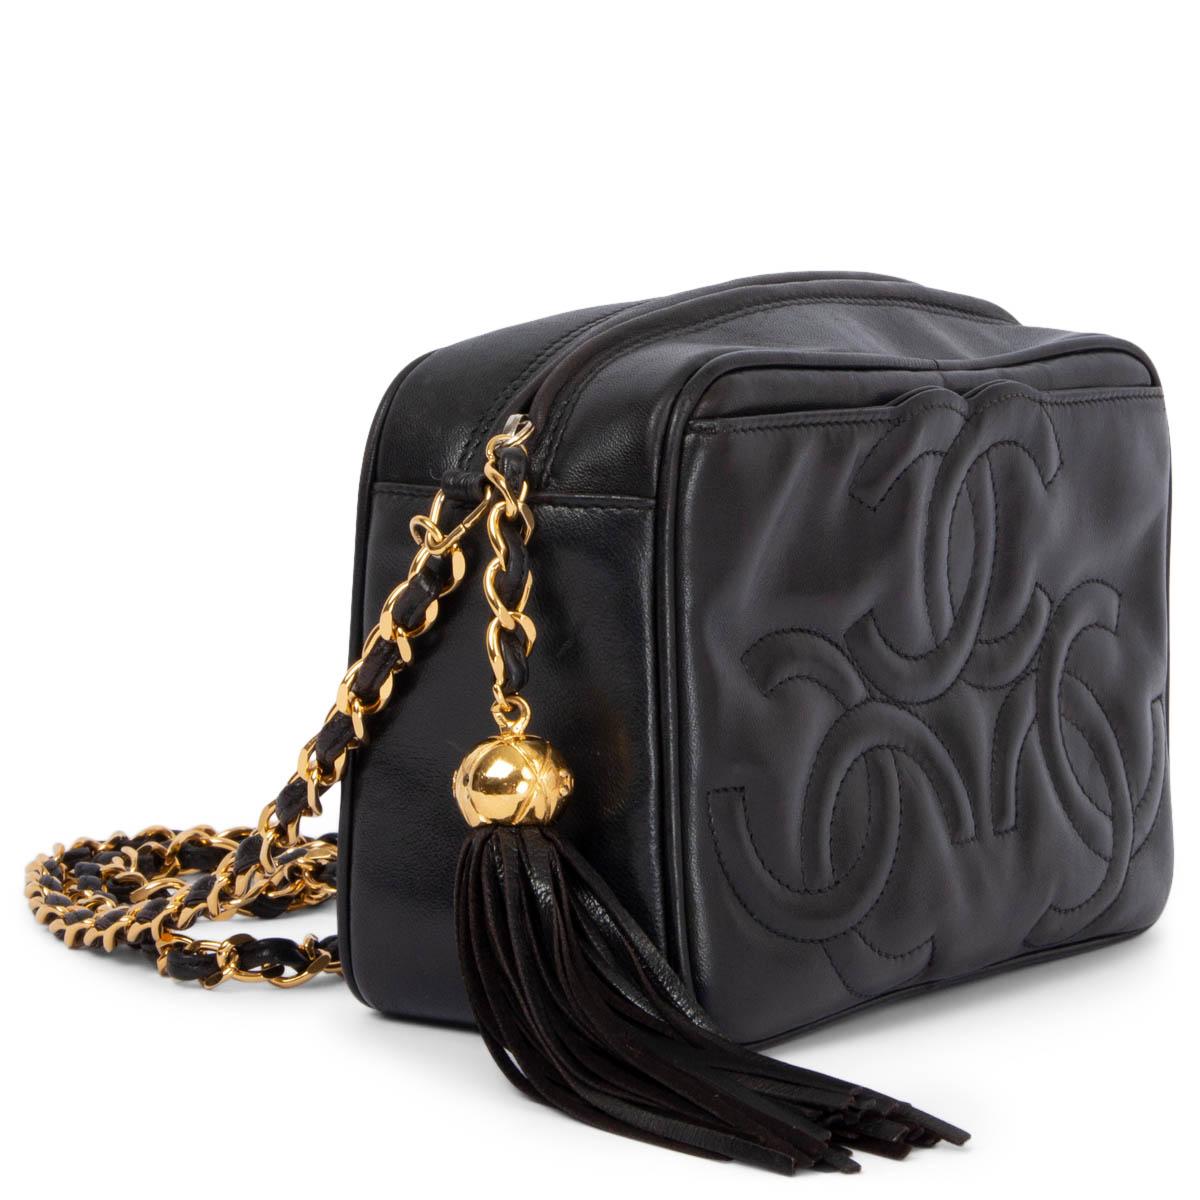 100% authentic Chanel 1994 triple logo tassel camera shoulder bag in black smooth lambskin featuring gold-tone hardware. Open with a tassel zipper on top and is lined in black leather with one ziper pocket against the back and a flat pocket against